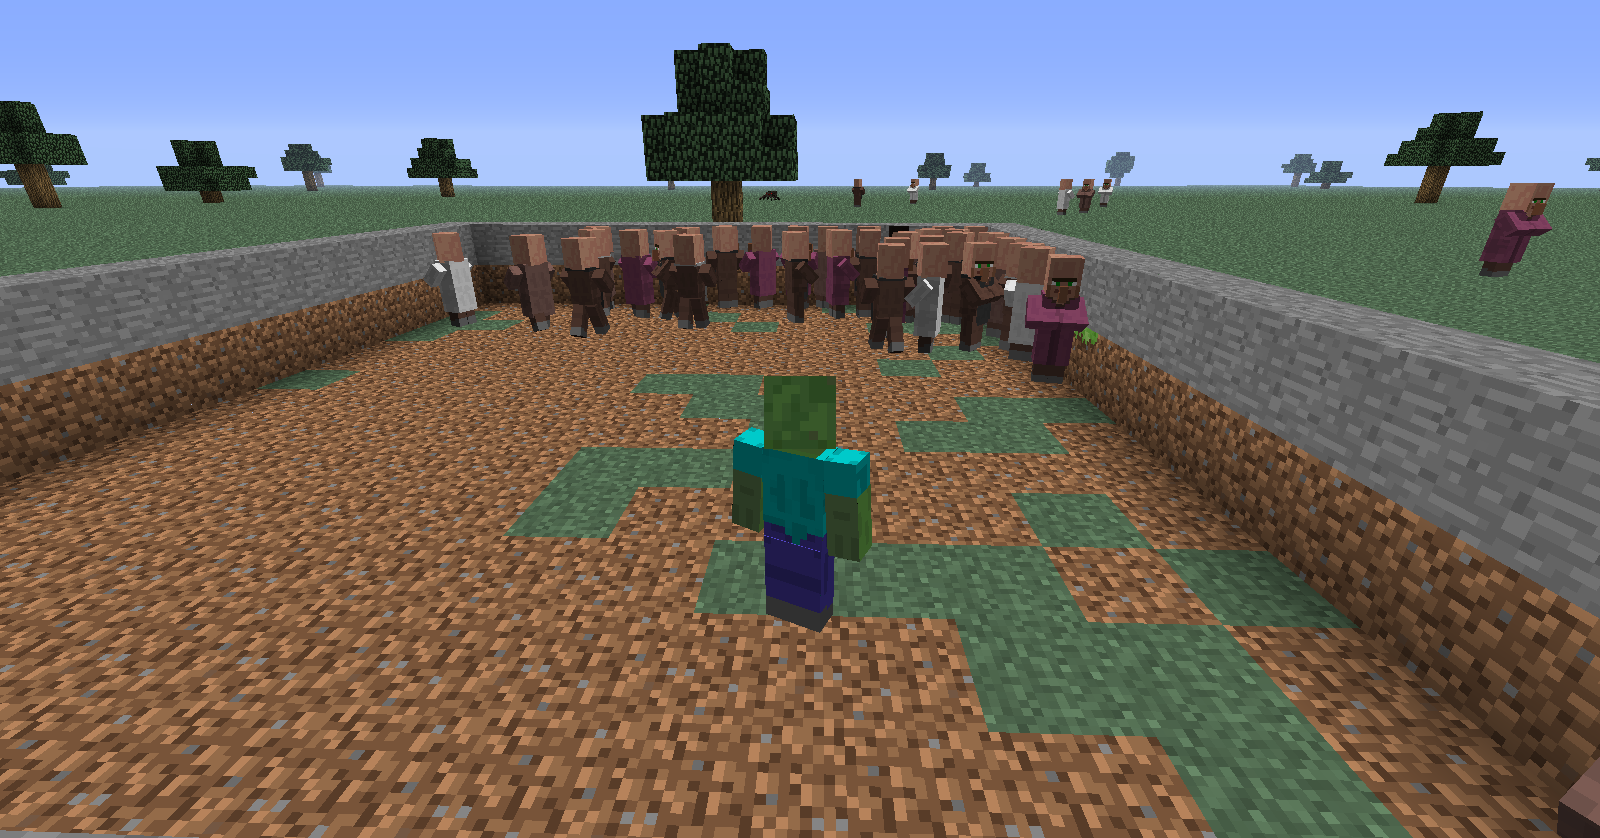 https://minecraft-forum.net/wp-content/uploads/2012/11/c37d2__You-Are-The-Zombie-Mod-2.png